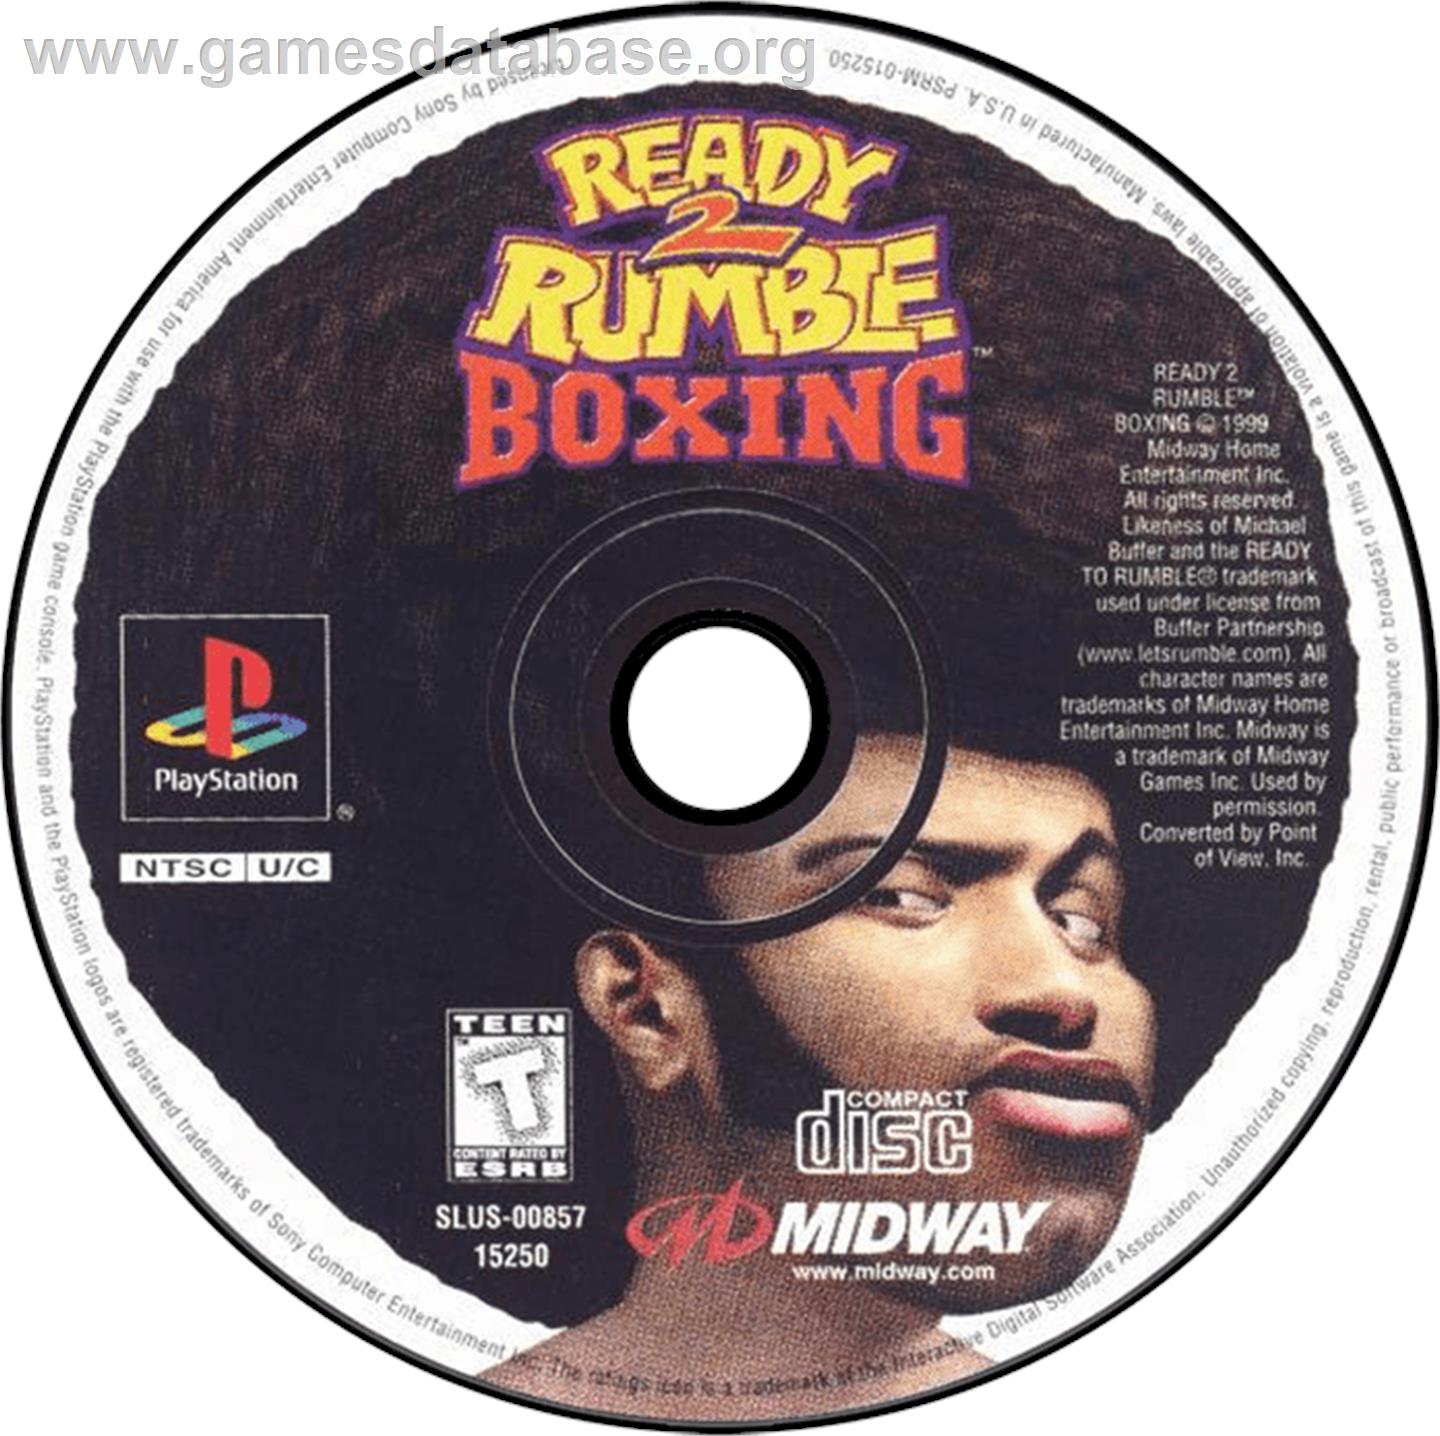 Ready 2 Rumble Boxing: Round 2 - Sony Playstation - Artwork - Disc